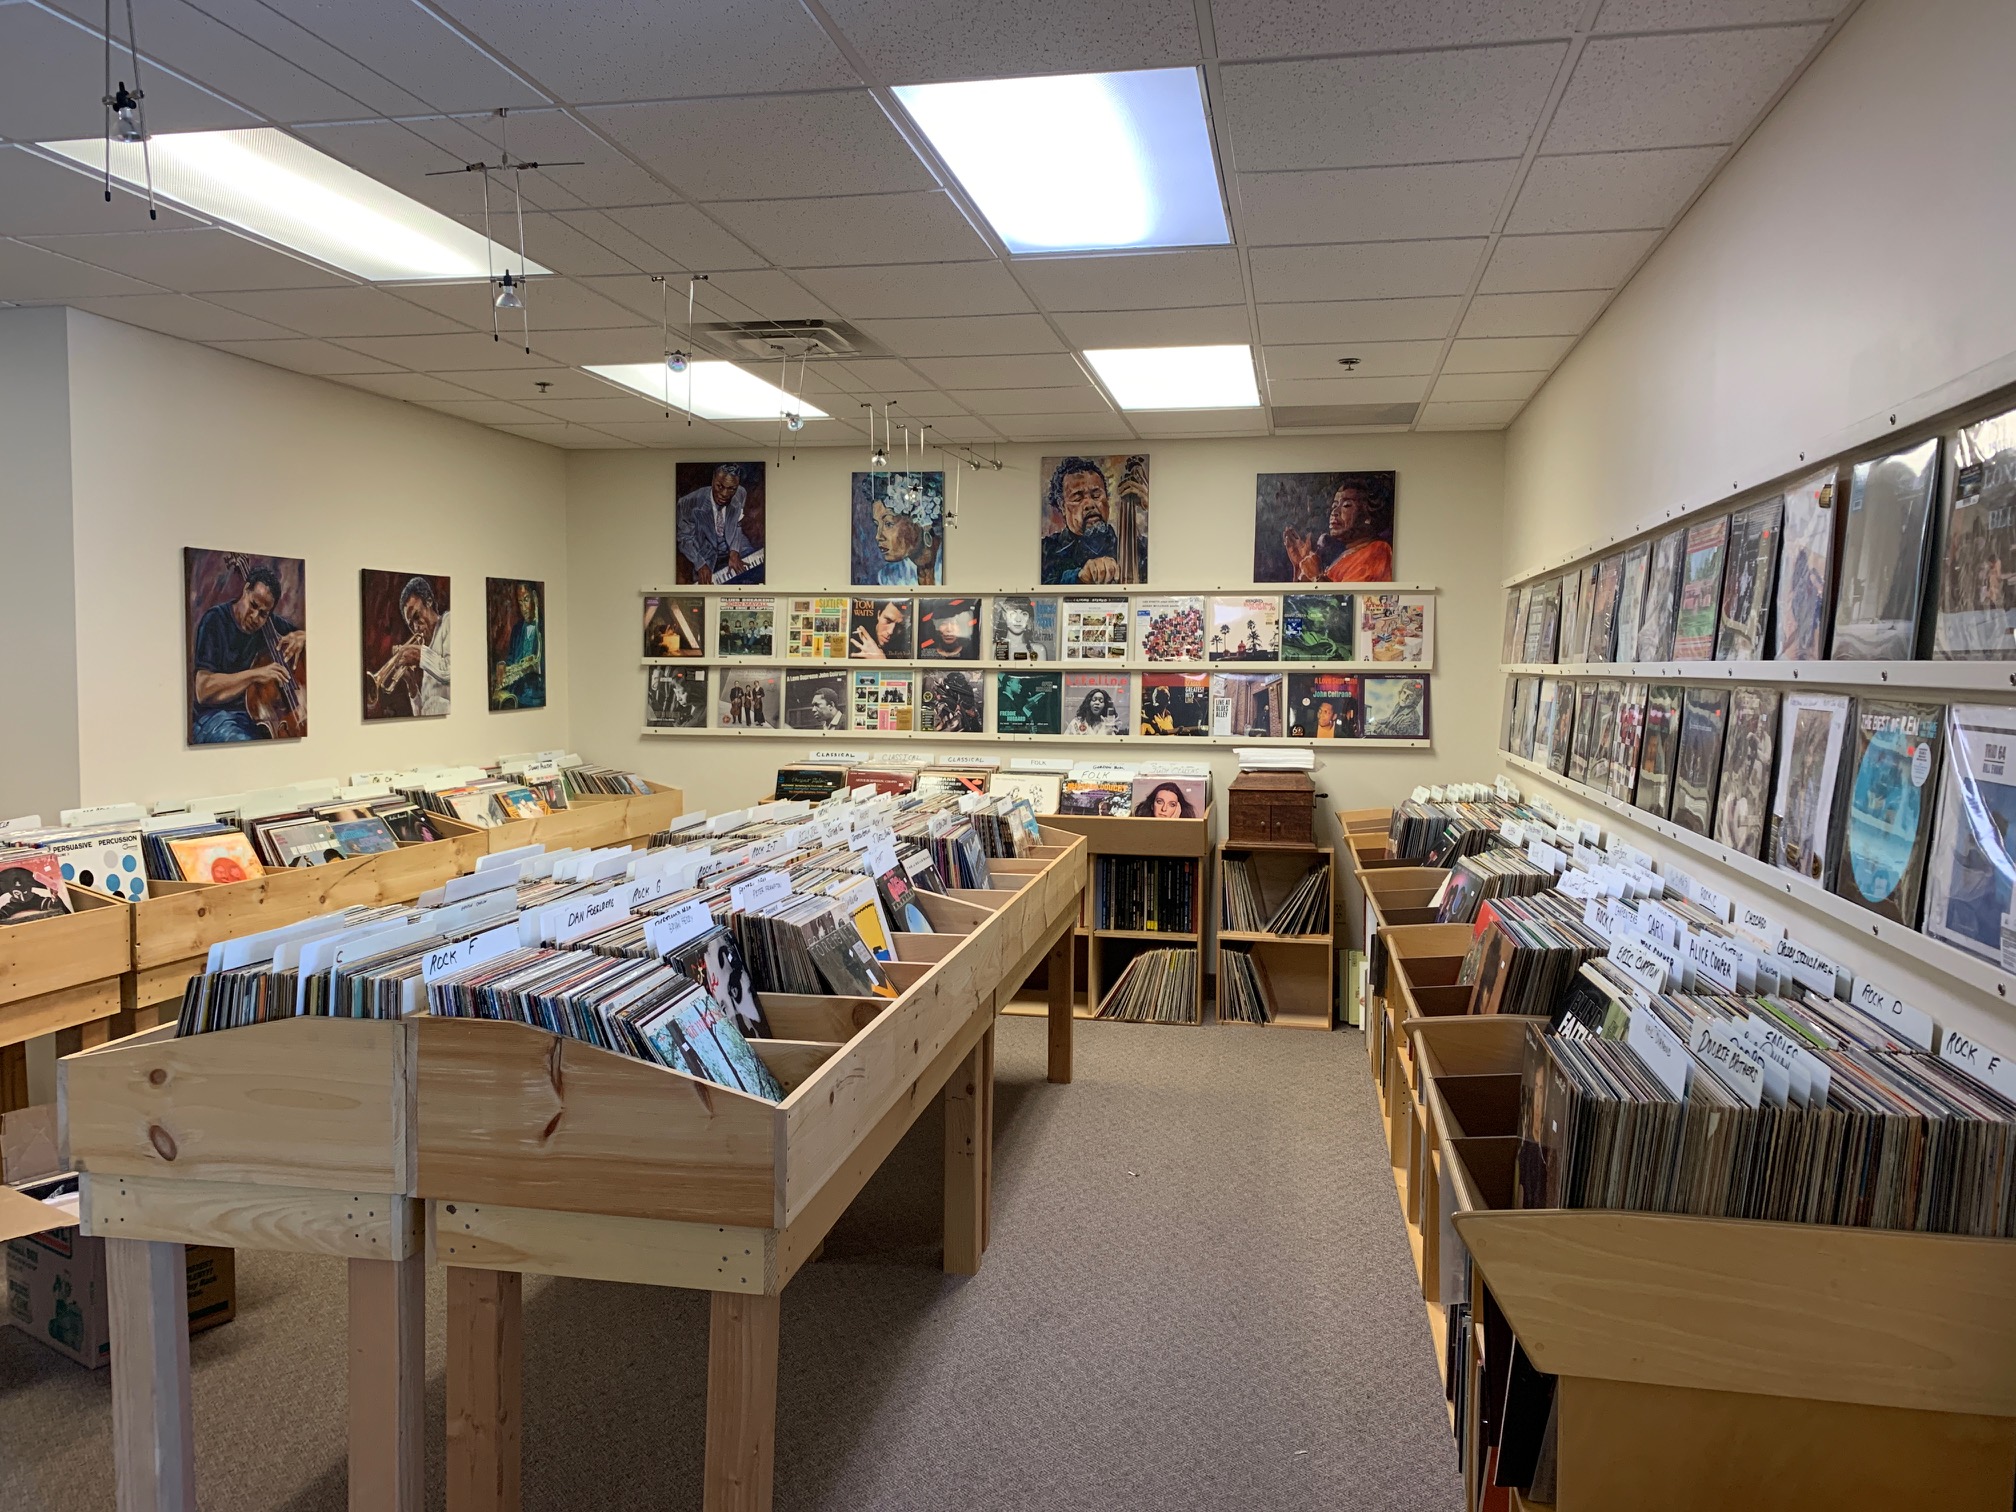 Fidelis has expanded and organized our new and used record offerings - come check it out!